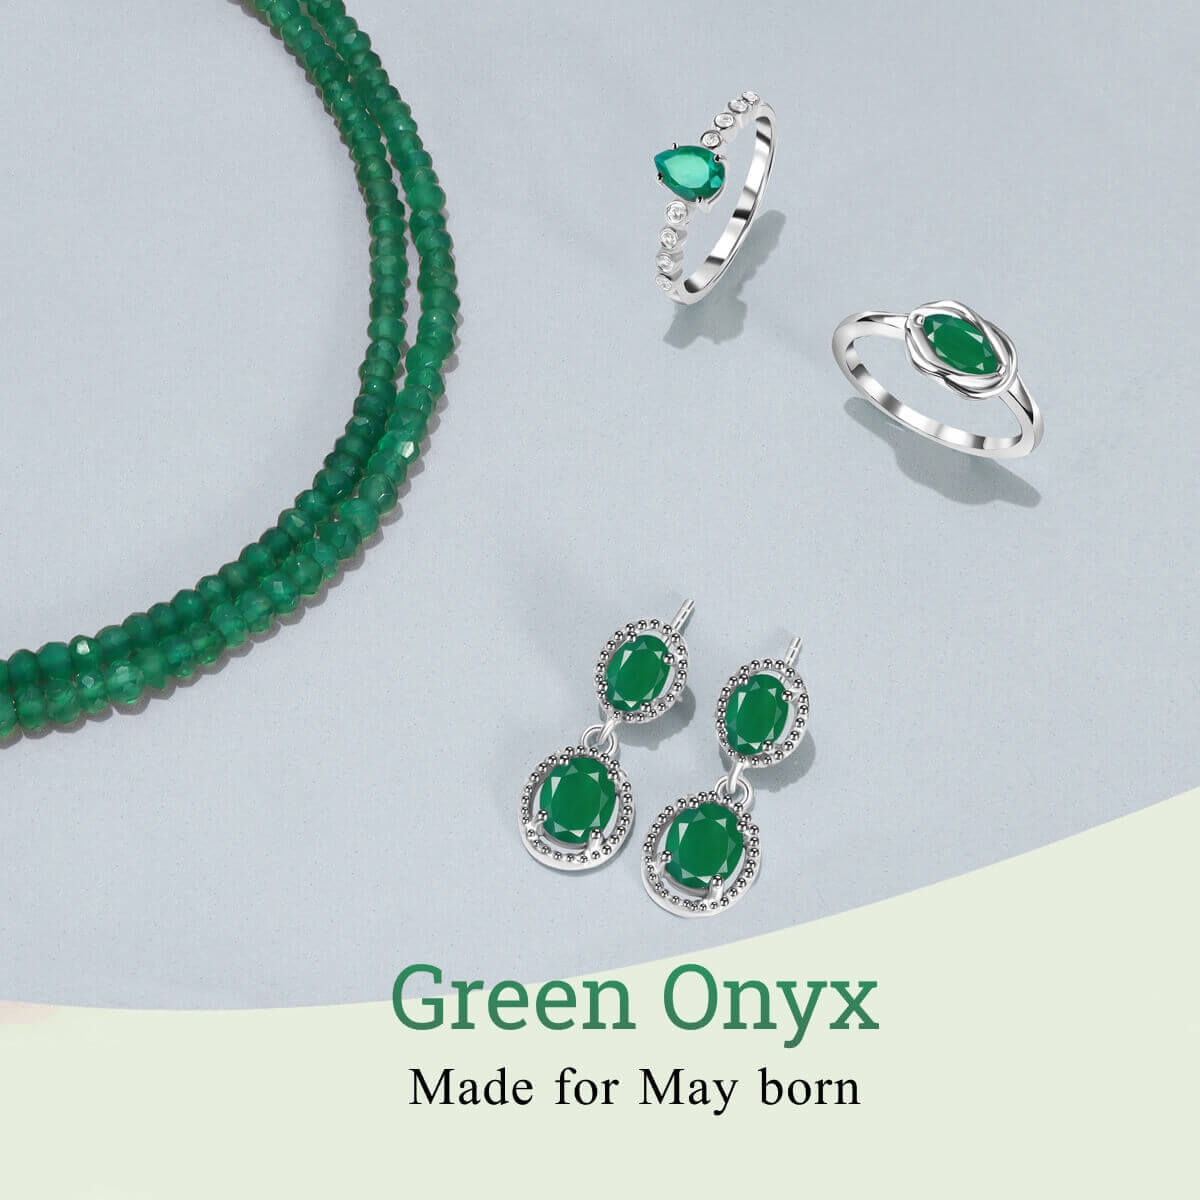 Green Onyx - Made for May born